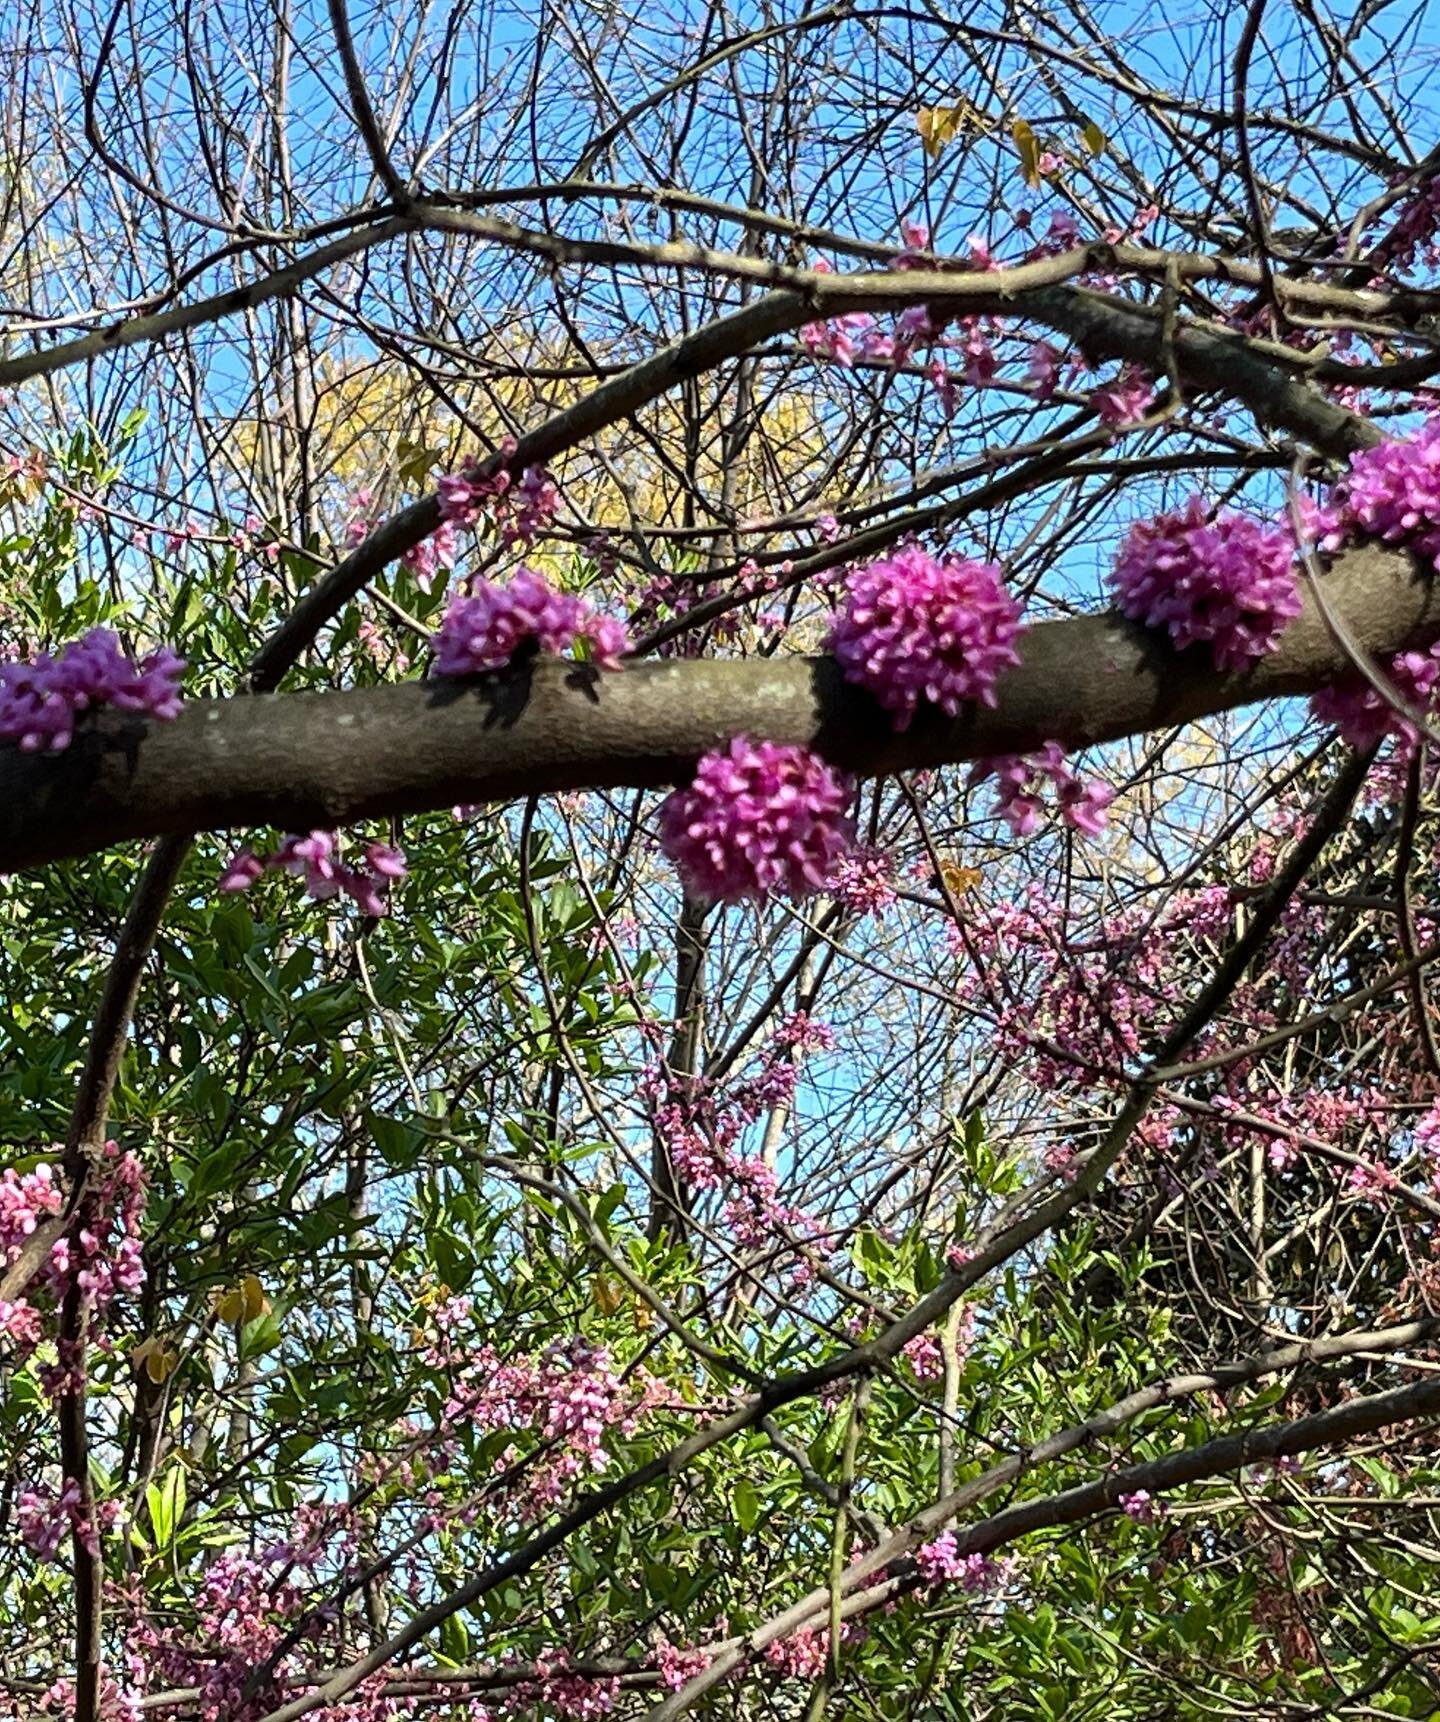 Eastern Redbud, Mountain Witch Alder and Crab Apple Trees were on display on my walk today. I love how the Redbud flowers grow along the branches and trunk of the tree like beautiful barnacles. I learned that this trait is called cauliflory and is no